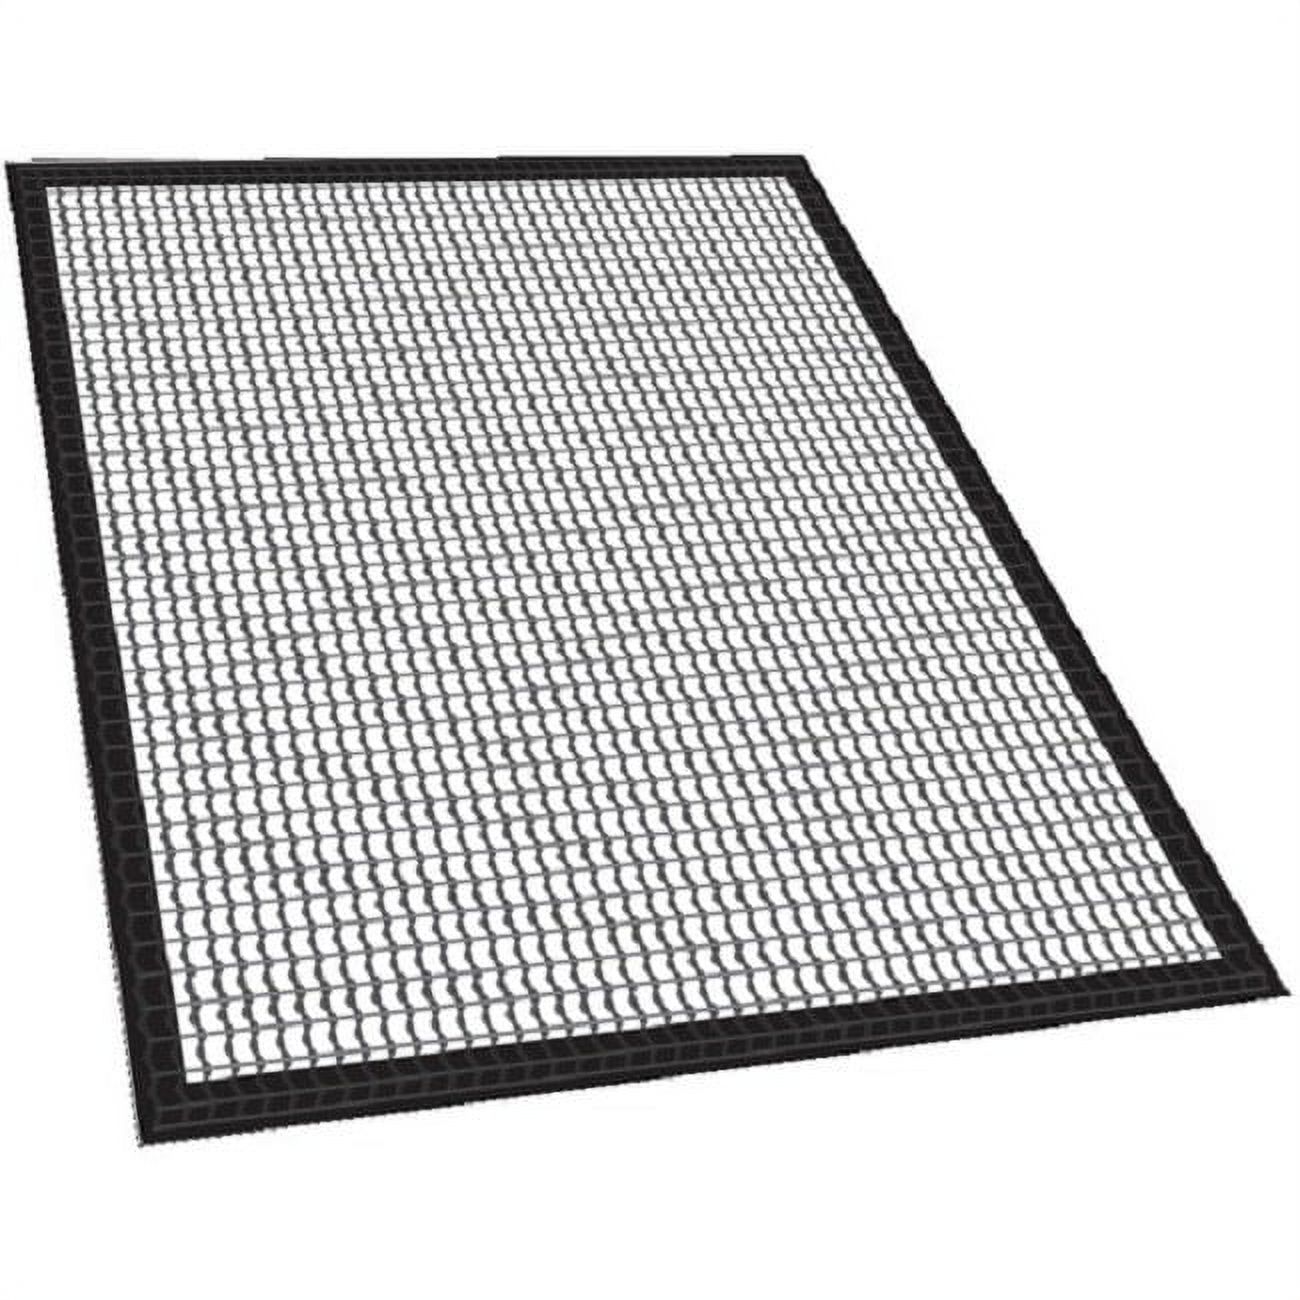 Masterbuilt 20090213 2-Piece Fish and Vegetable Mat for 30-Inch Smoker (Discontinued by Manufacturer) - image 2 of 2